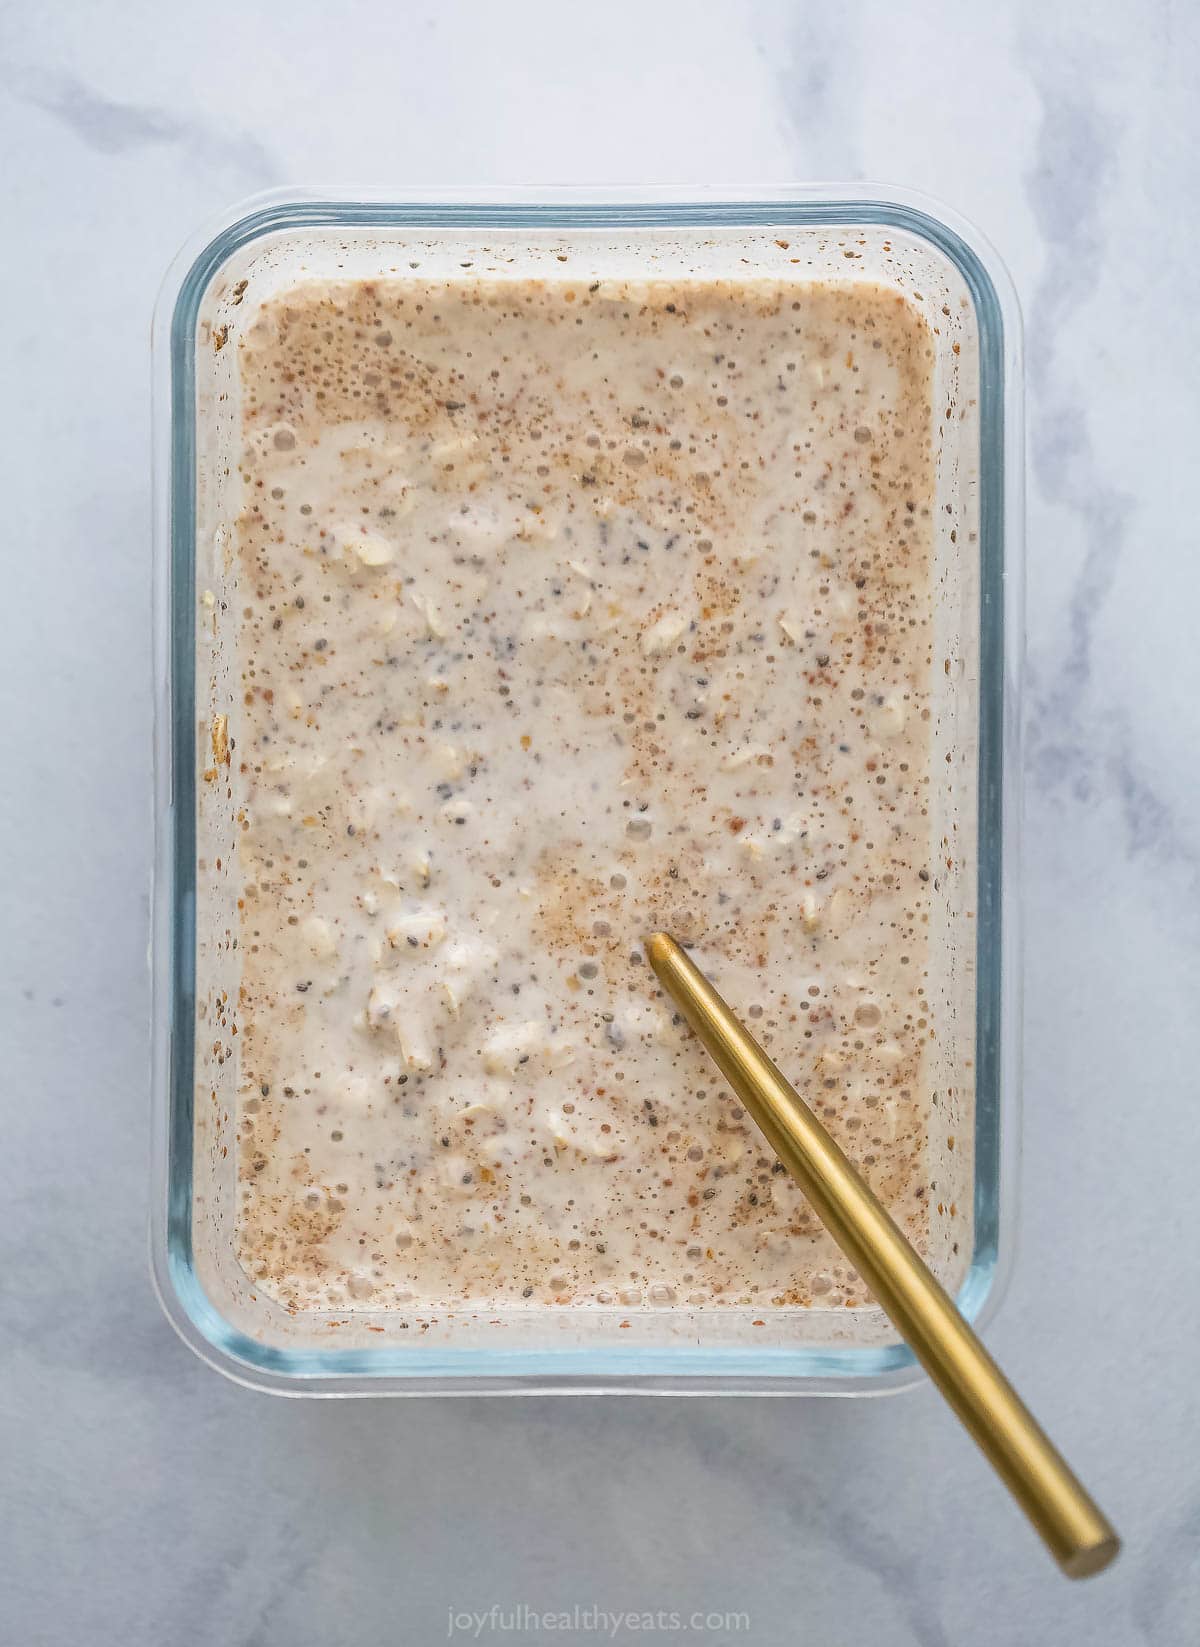 Mixed overnight oats mixture in a glass container. 